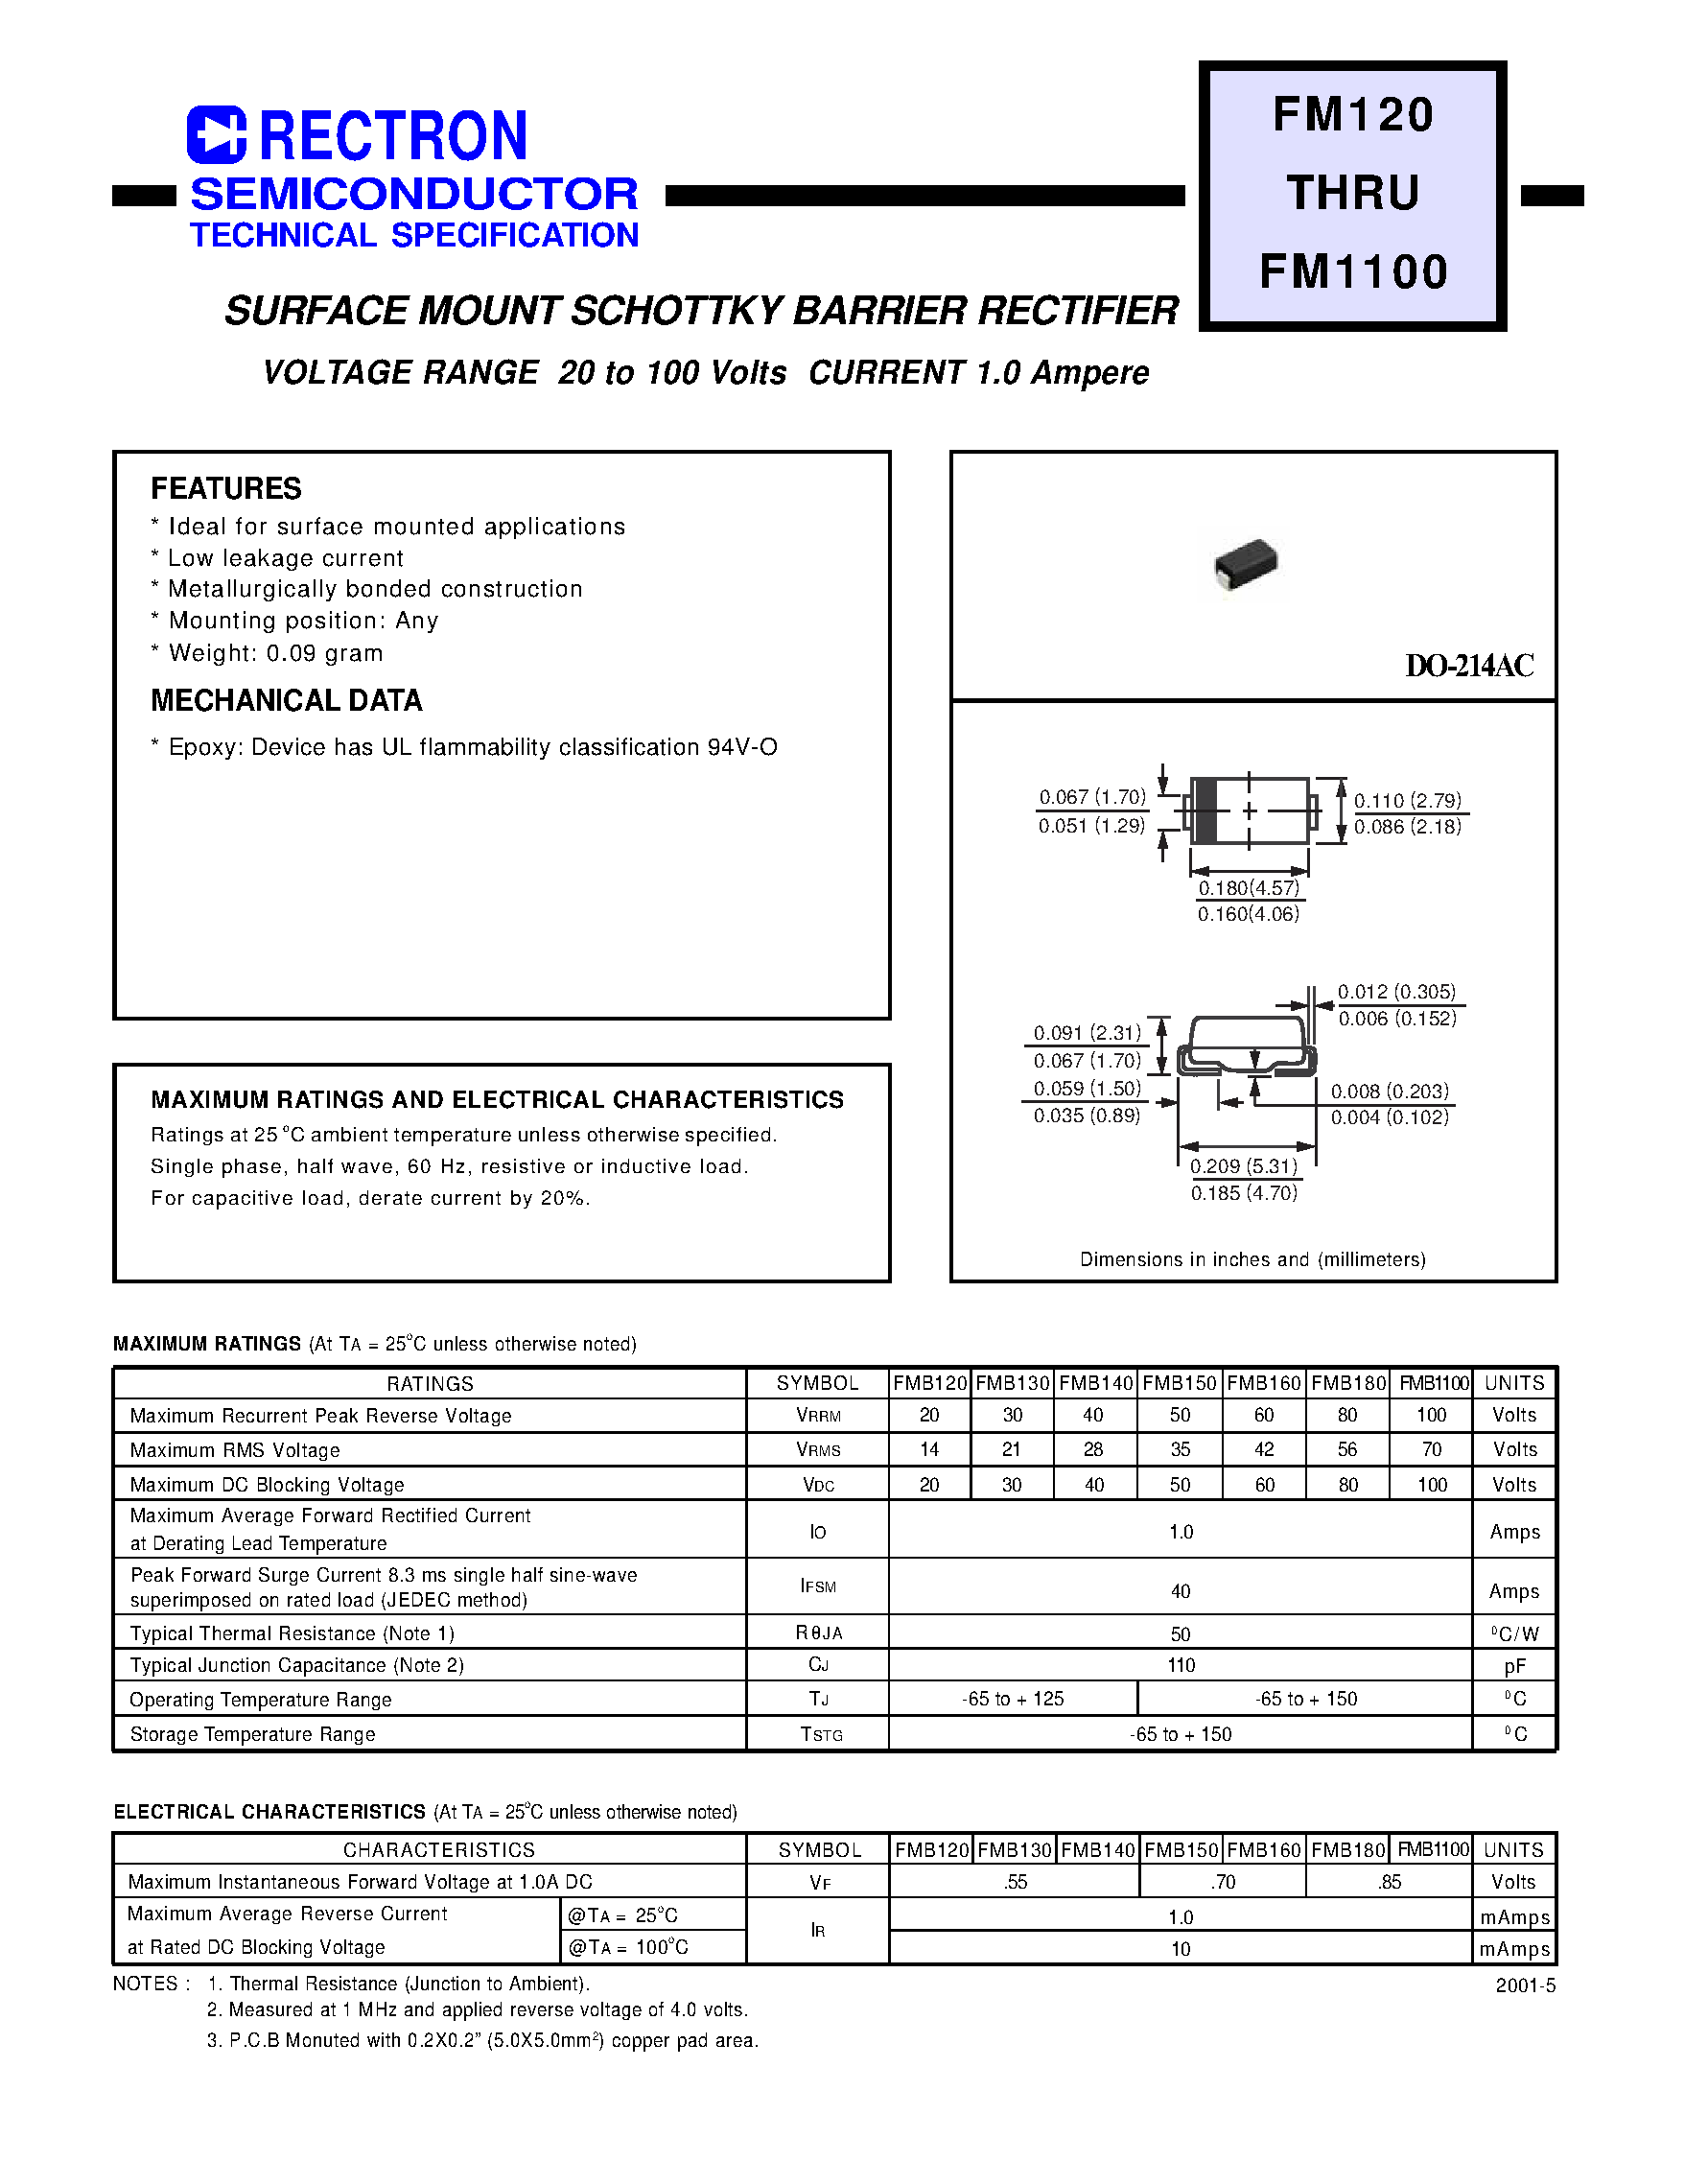 Datasheet FMB150 - SURFACE MOUNT SCHOTTKY BARRIER RECTIFIER (VOLTAGE RANGE 20 to 100 Volts CURRENT 1.0 Ampere) page 1